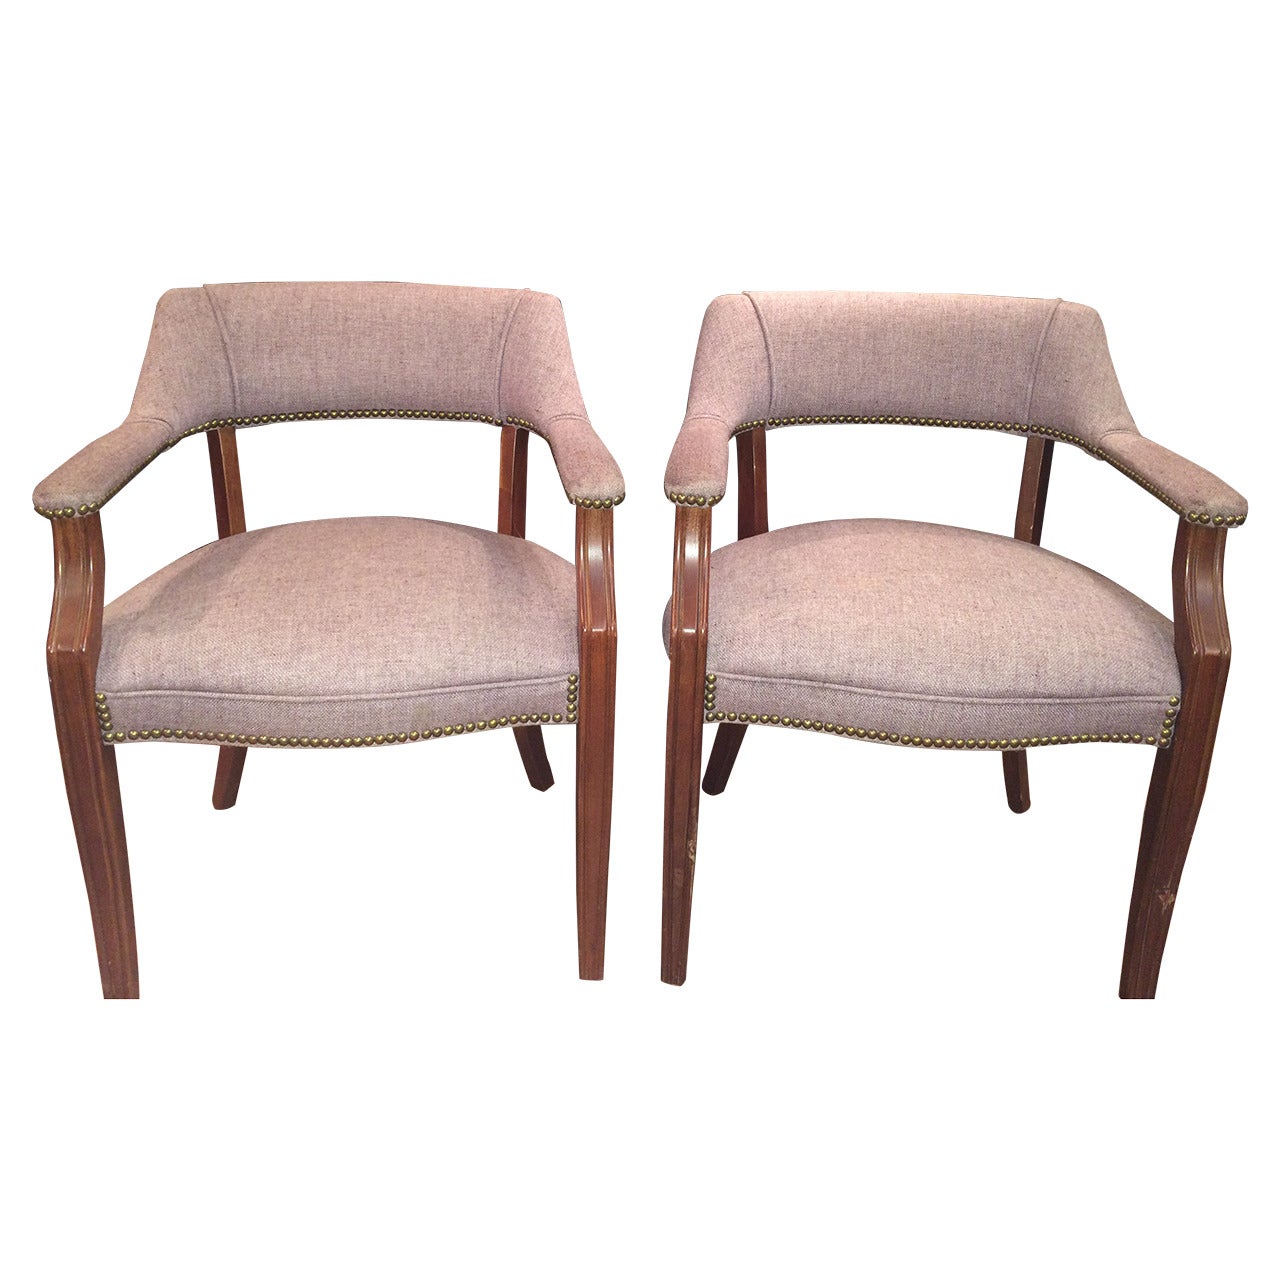 Pair of Mid-Century Arm chairs